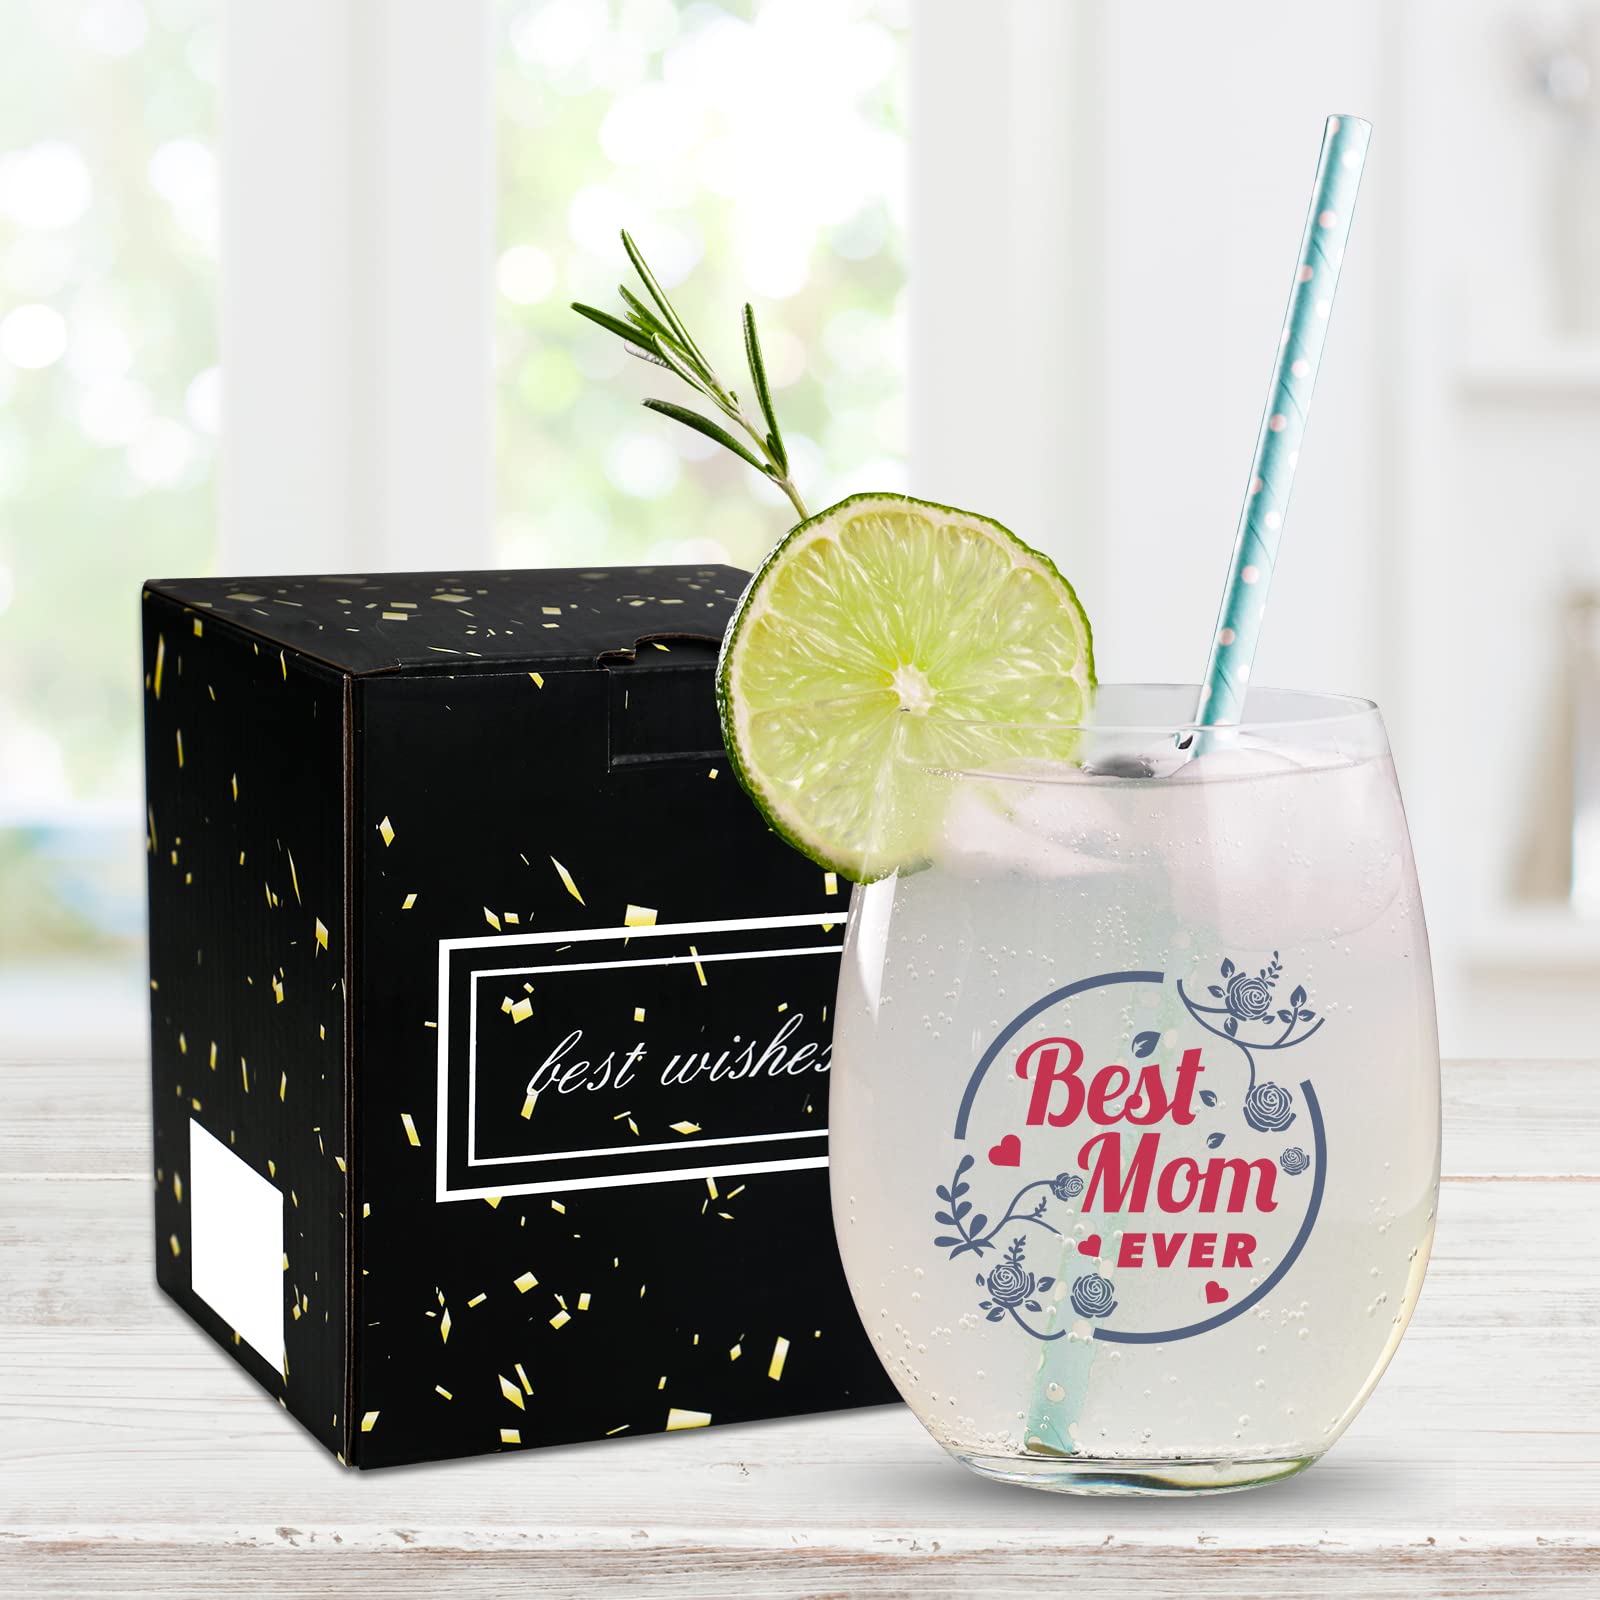 Best Mom Ever Wine Glass Christmas Gifts - Unique Wine Glasses Christmas Decorations Gifts for Mom